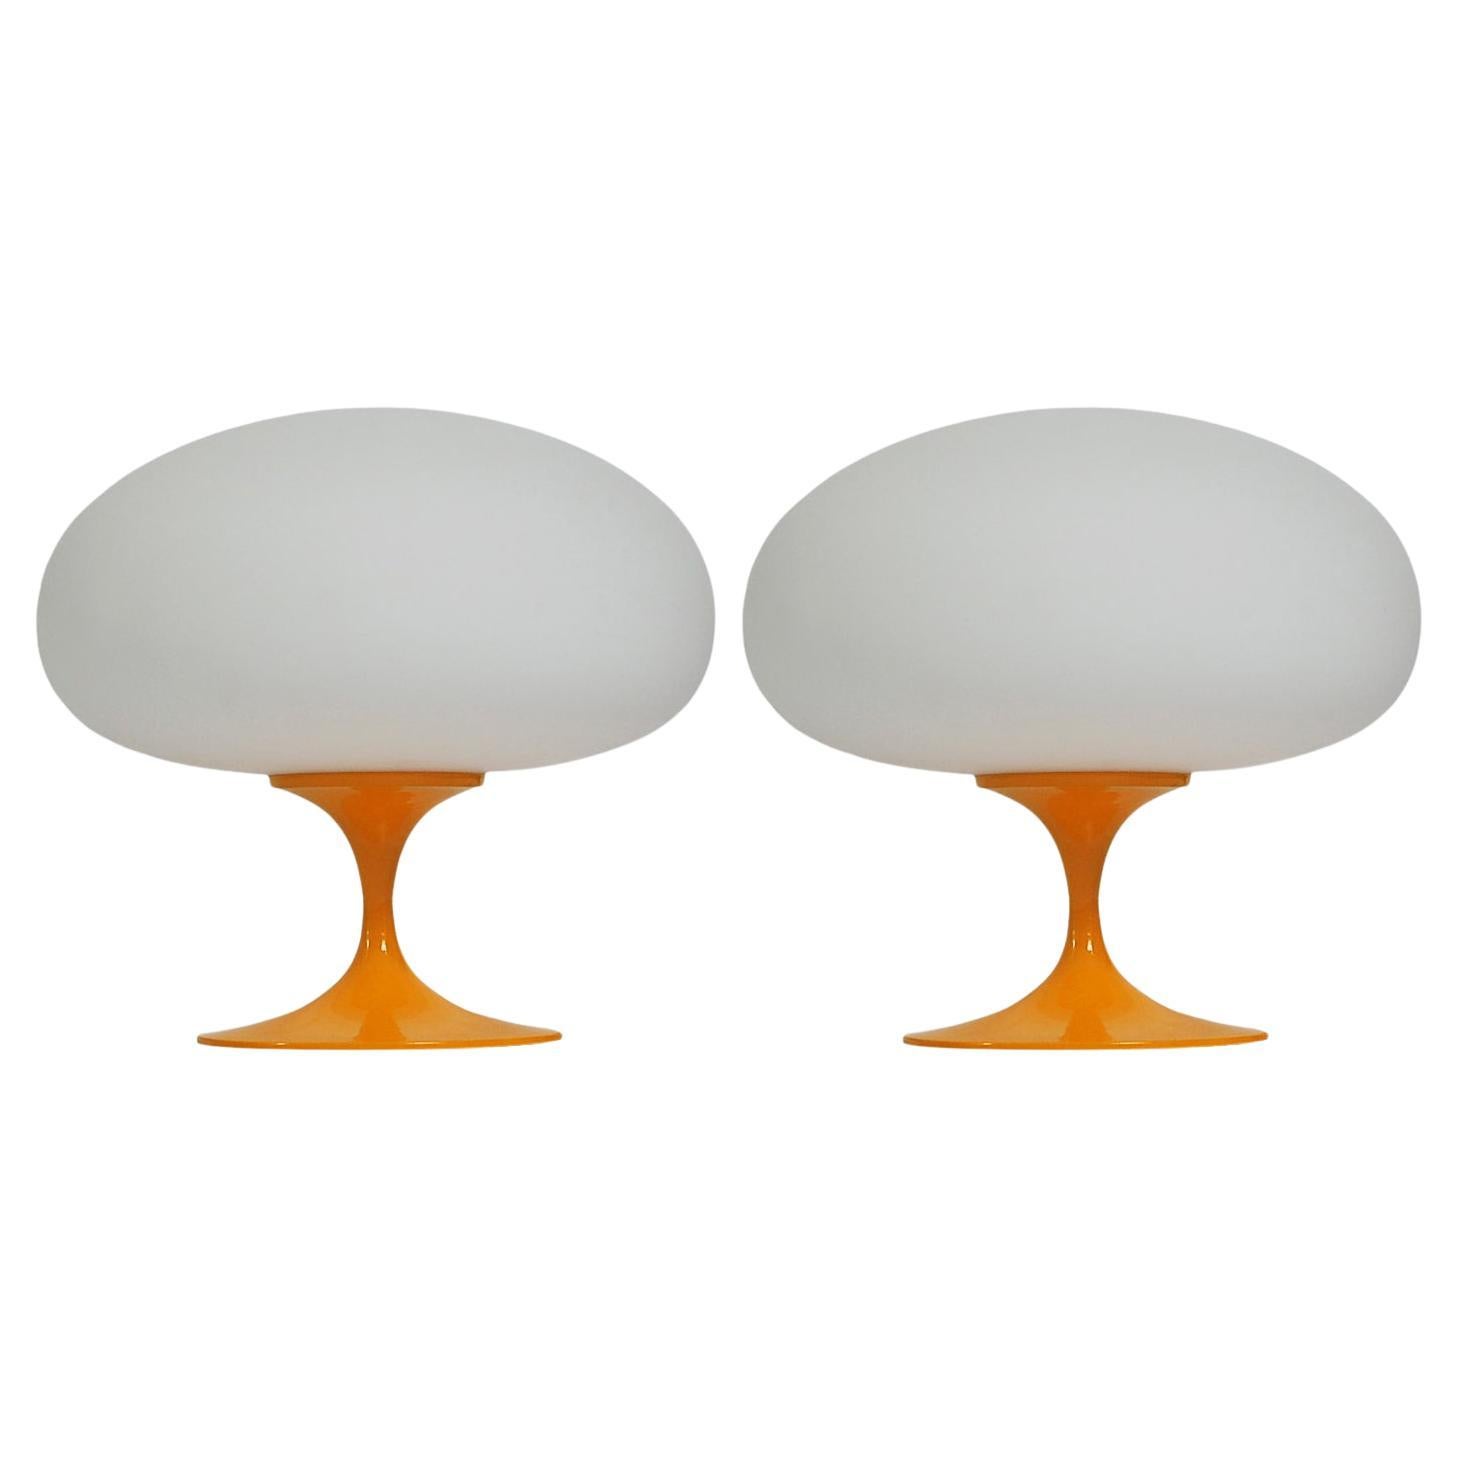 Pair of Mid-Century Tulip Table Lamps by Designline in Orange on White Glass For Sale